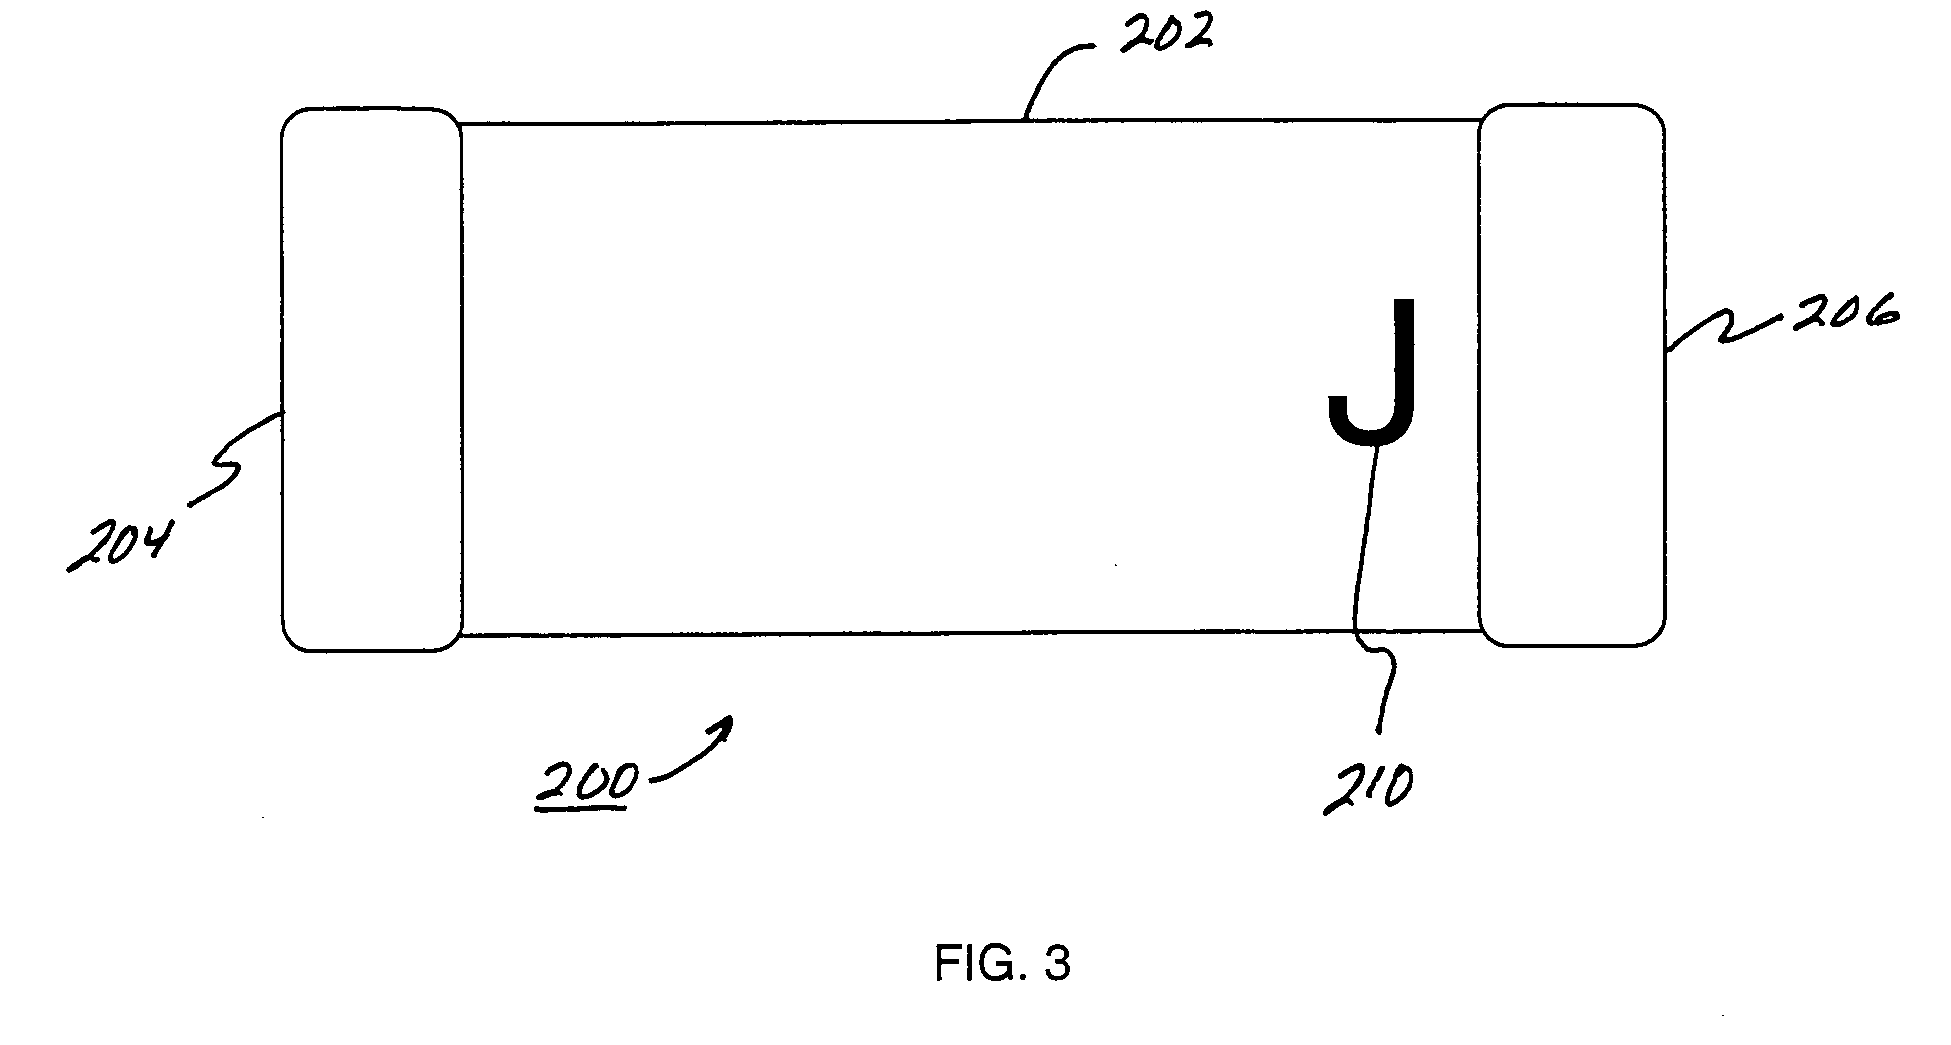 Capacitor having improved surface breakdown voltage performance and method for marking same